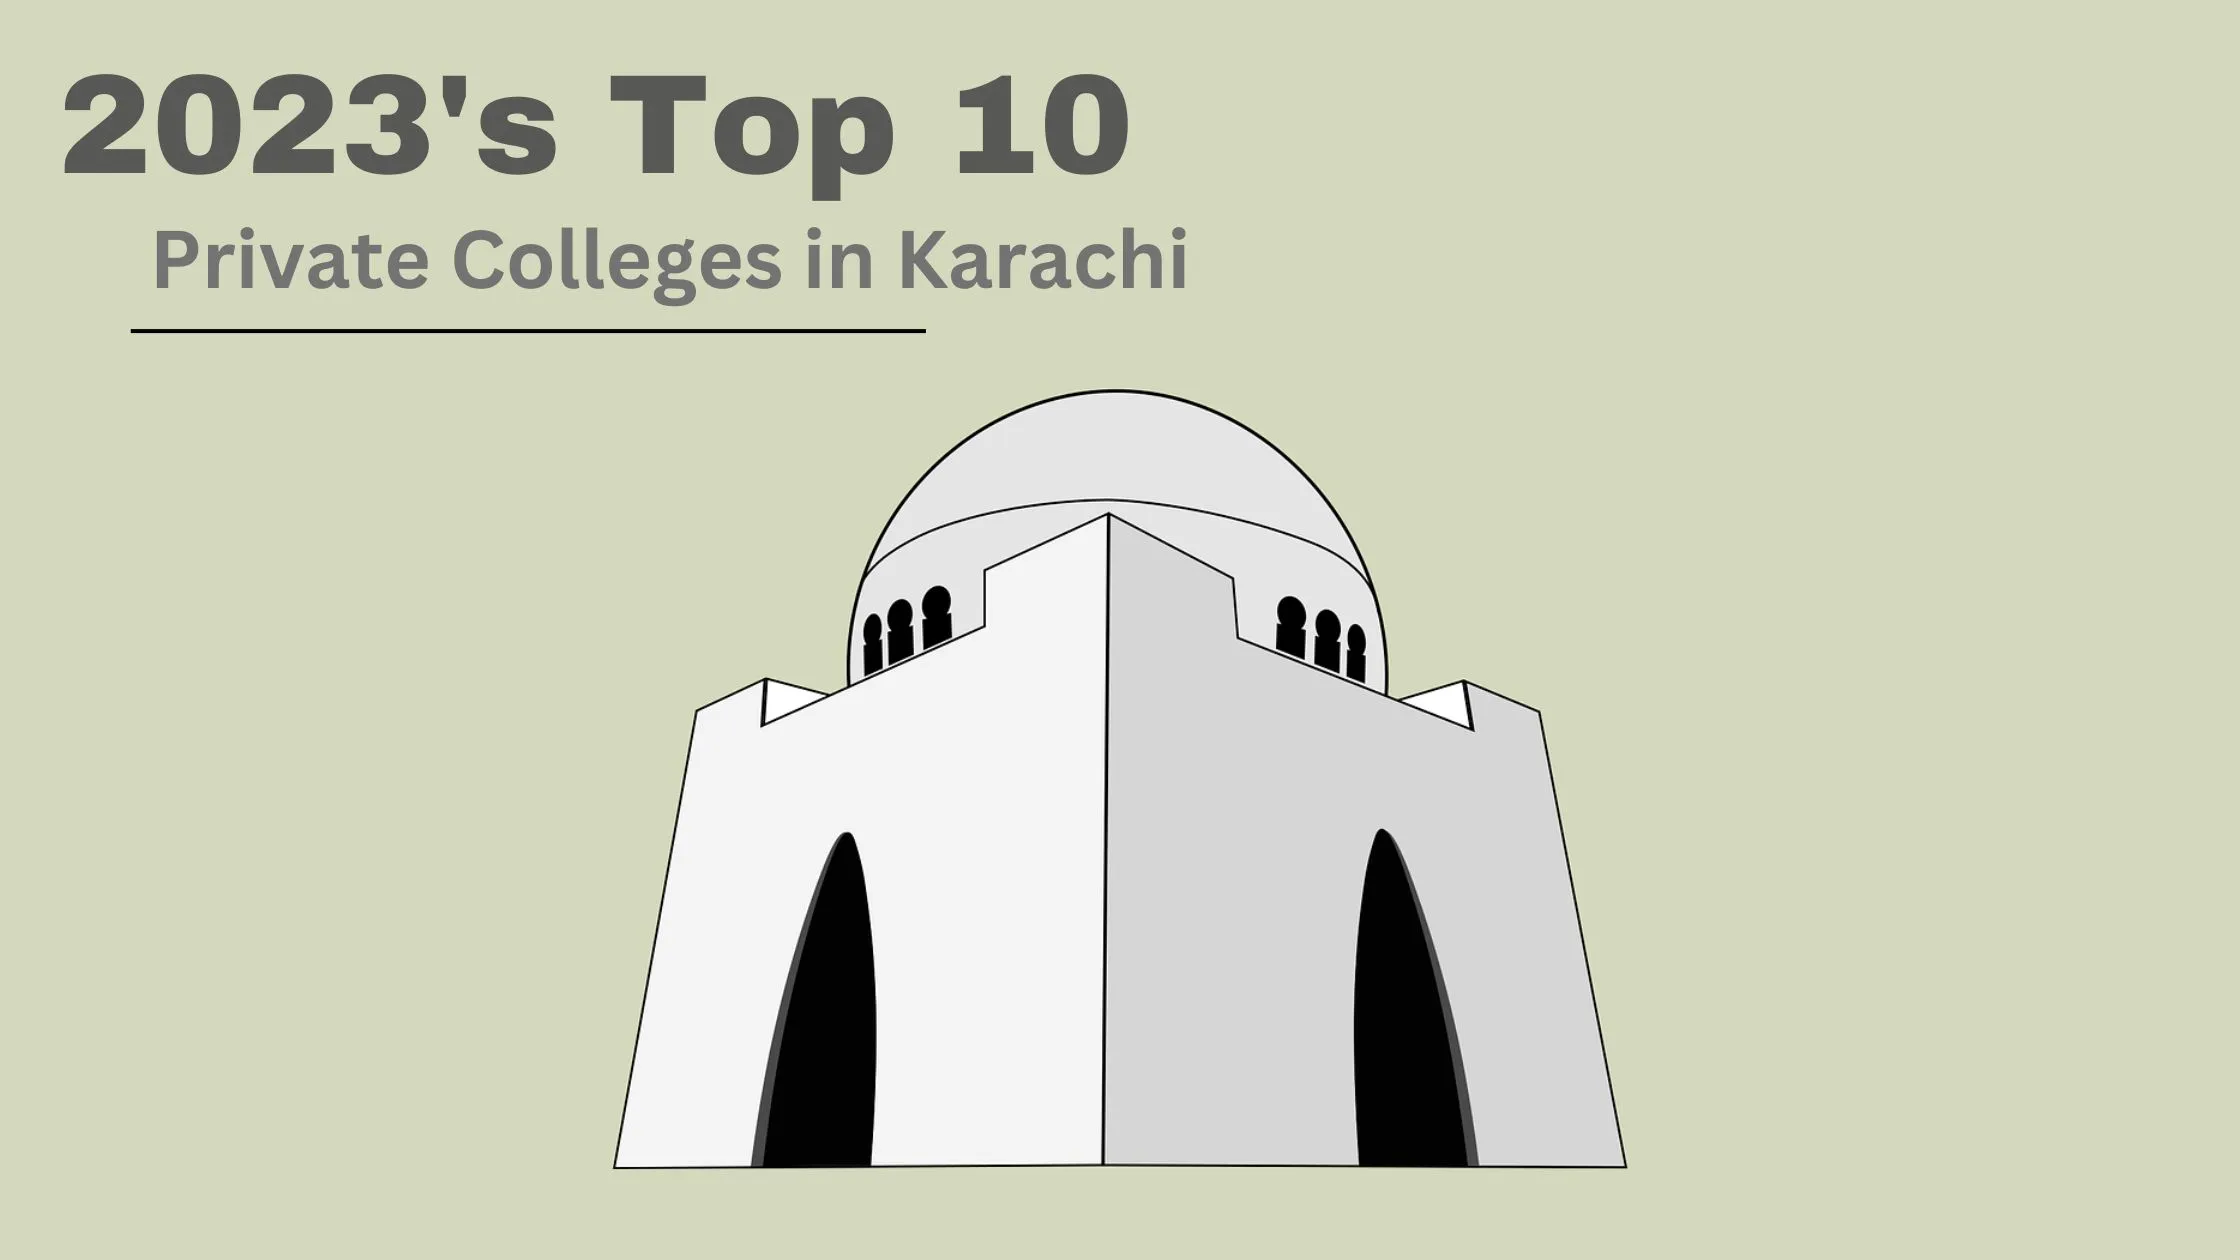 2023's Top 10 Private Colleges in Karachi